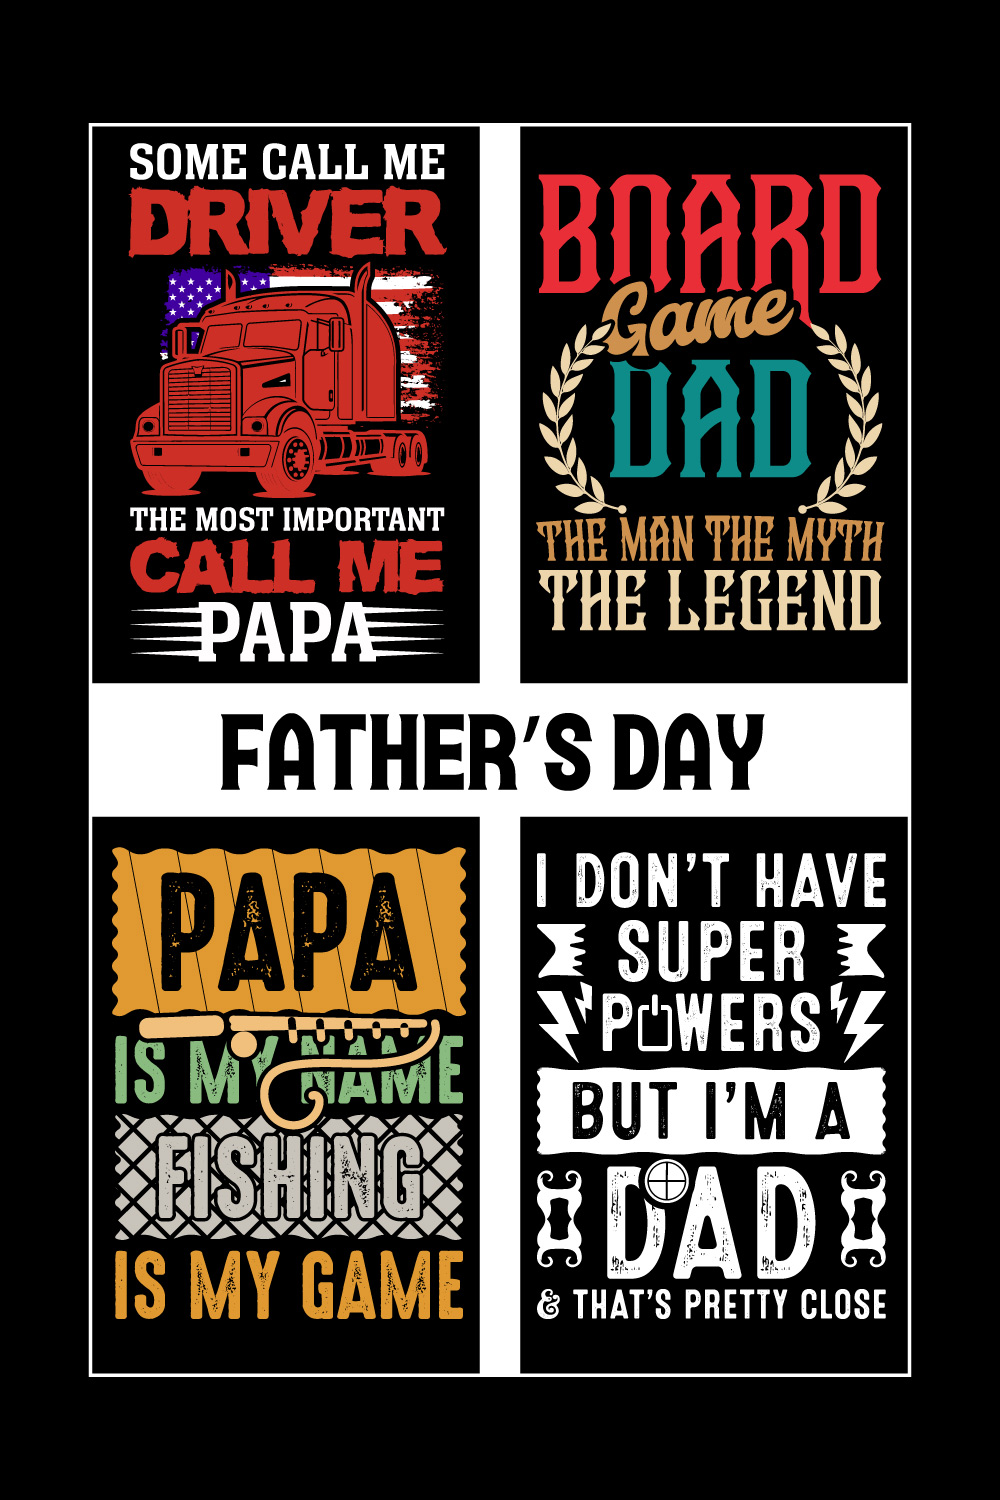 Father's Day T-Shirt- Dad T-Shirt Design- Father Day T-shirt- Happy Father's day t-shirt design ideas- Dad Day- Papa Son- fathers Day shirt ideas for family- T-shirt Design- Typography T-shirt pinterest preview image.